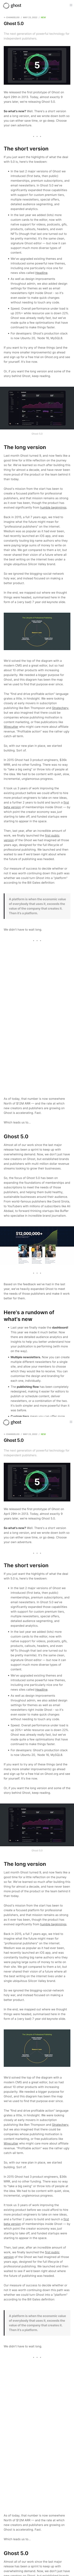 Ghost 5.0 landing page design